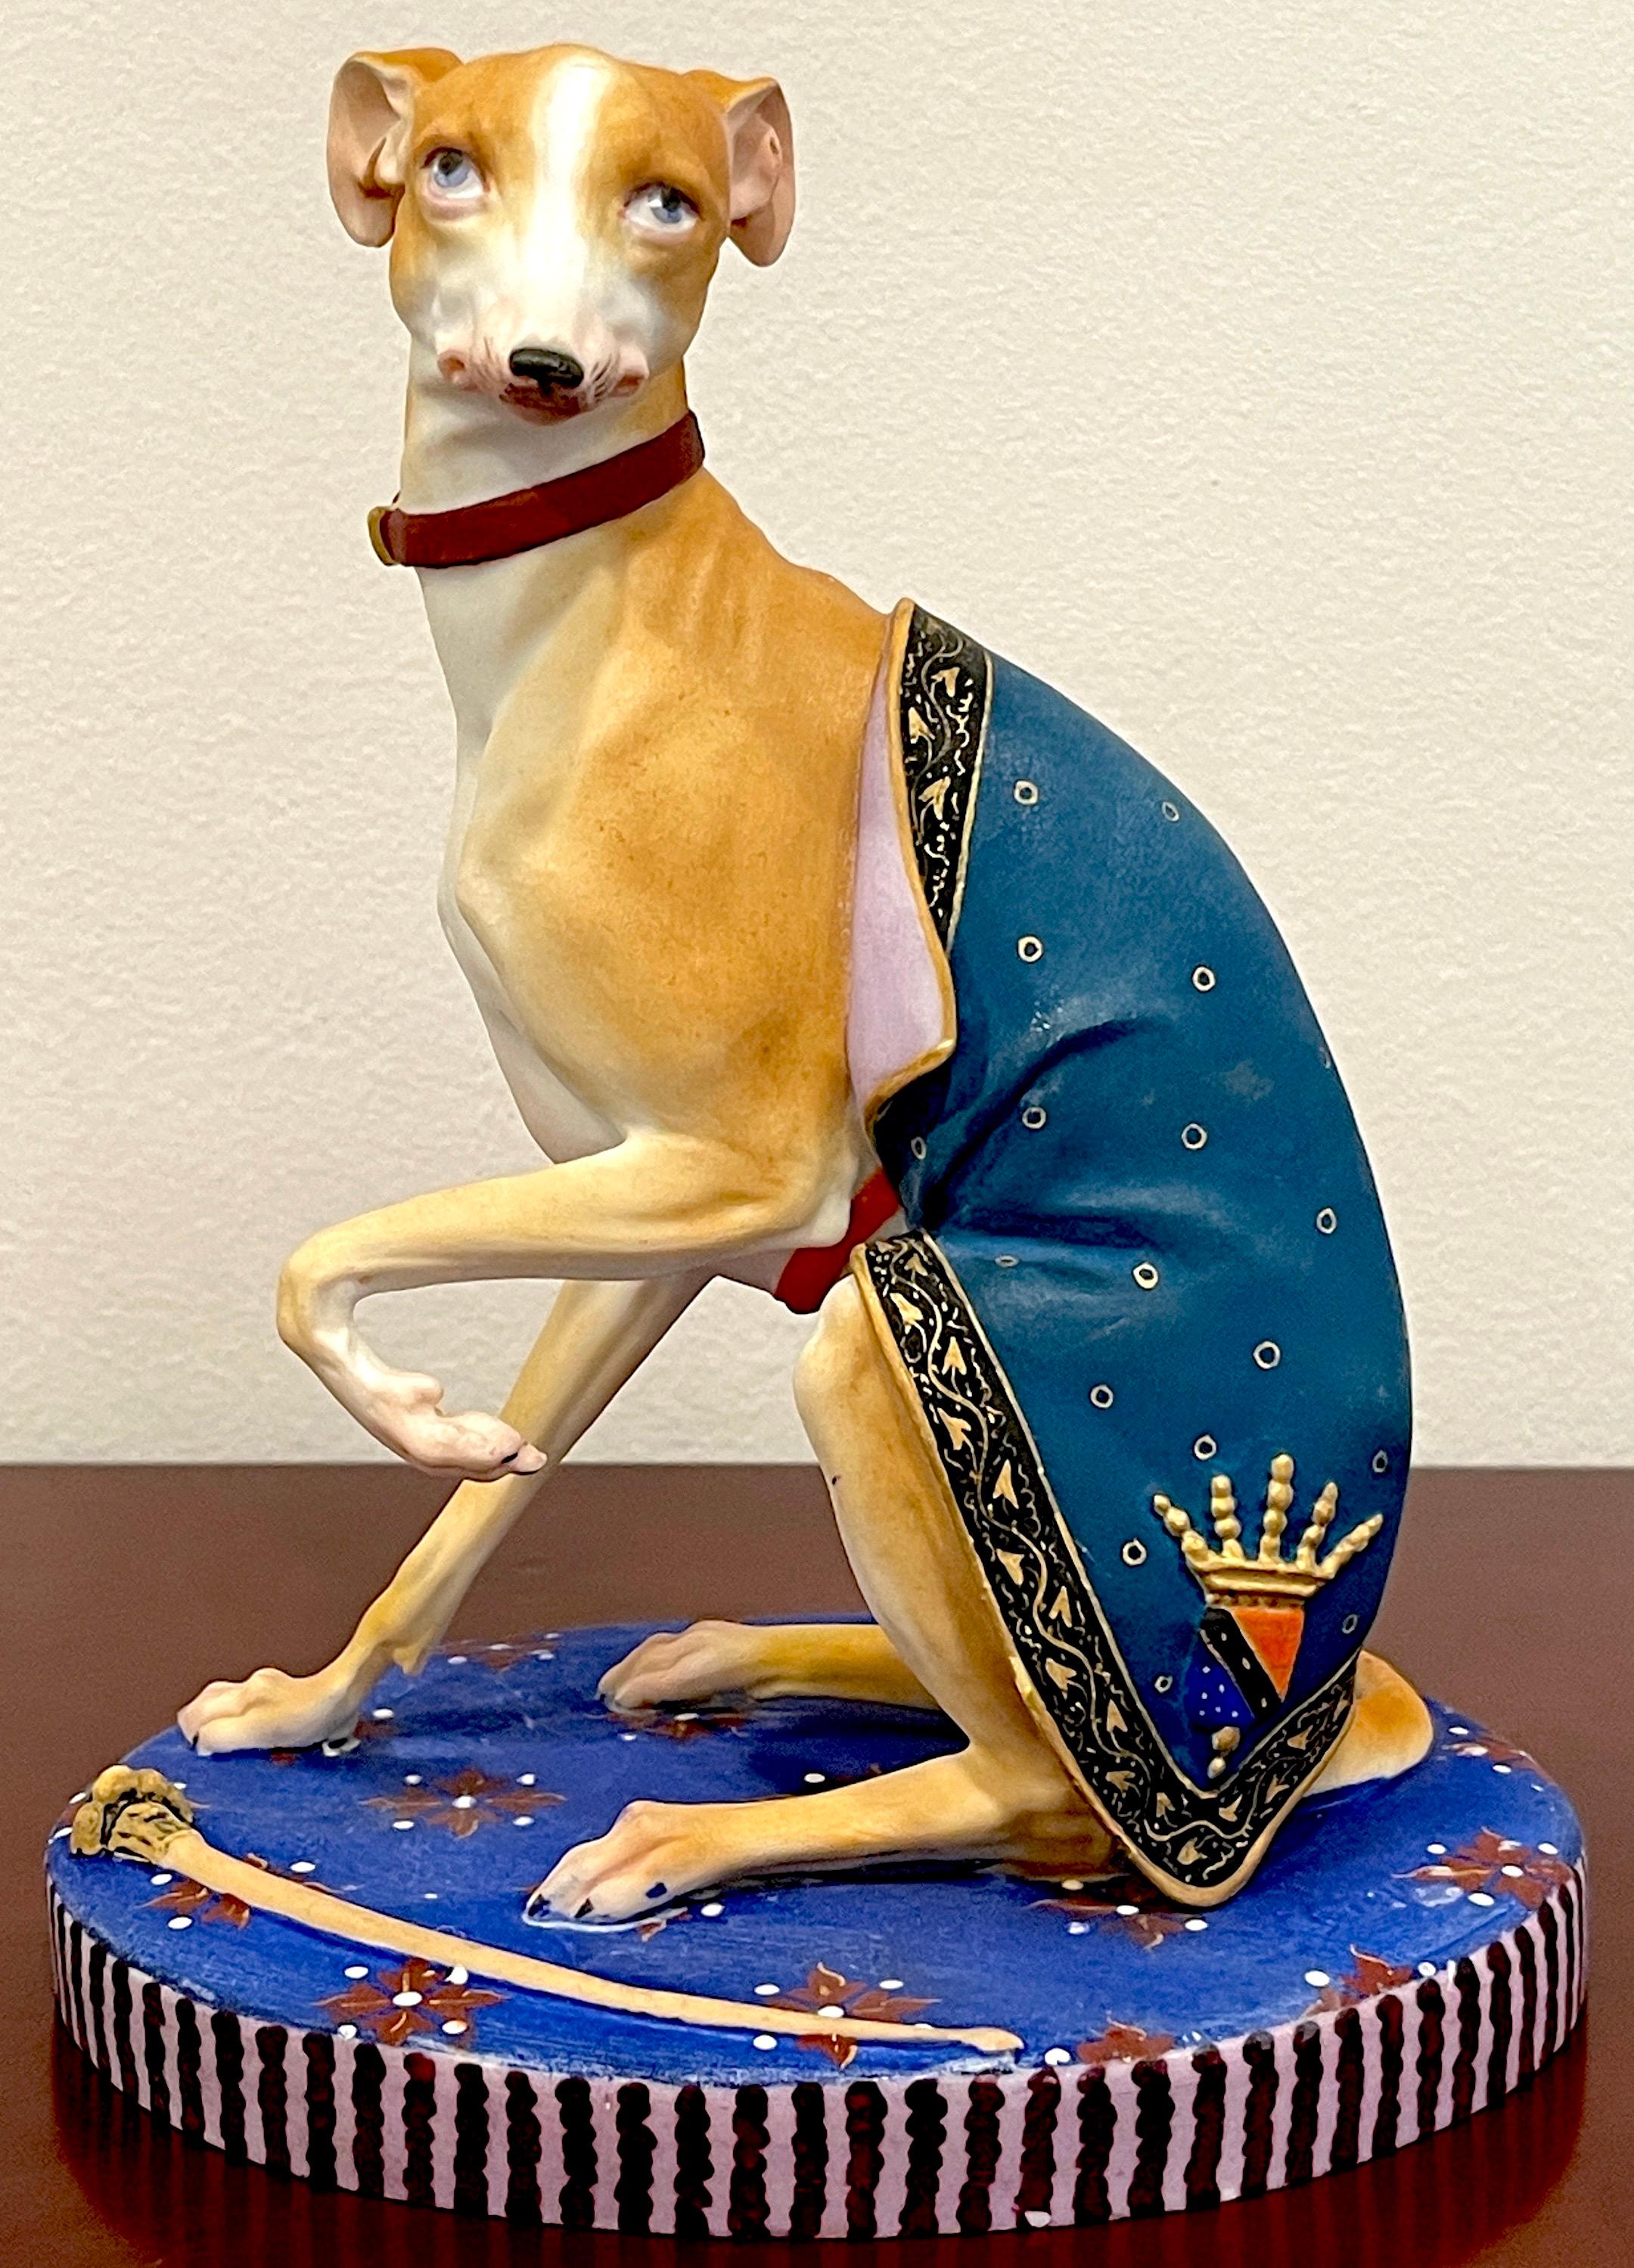 Old Paris Polychromed Biscuit Porcelain Model of Seated Draped Armorial Whippet / Greyhound
France, Circa 1880

Realistically modeled figure of a seated Whippet/ Greyhound, draped  with an armorial crested blanket, raised on an oval base with a